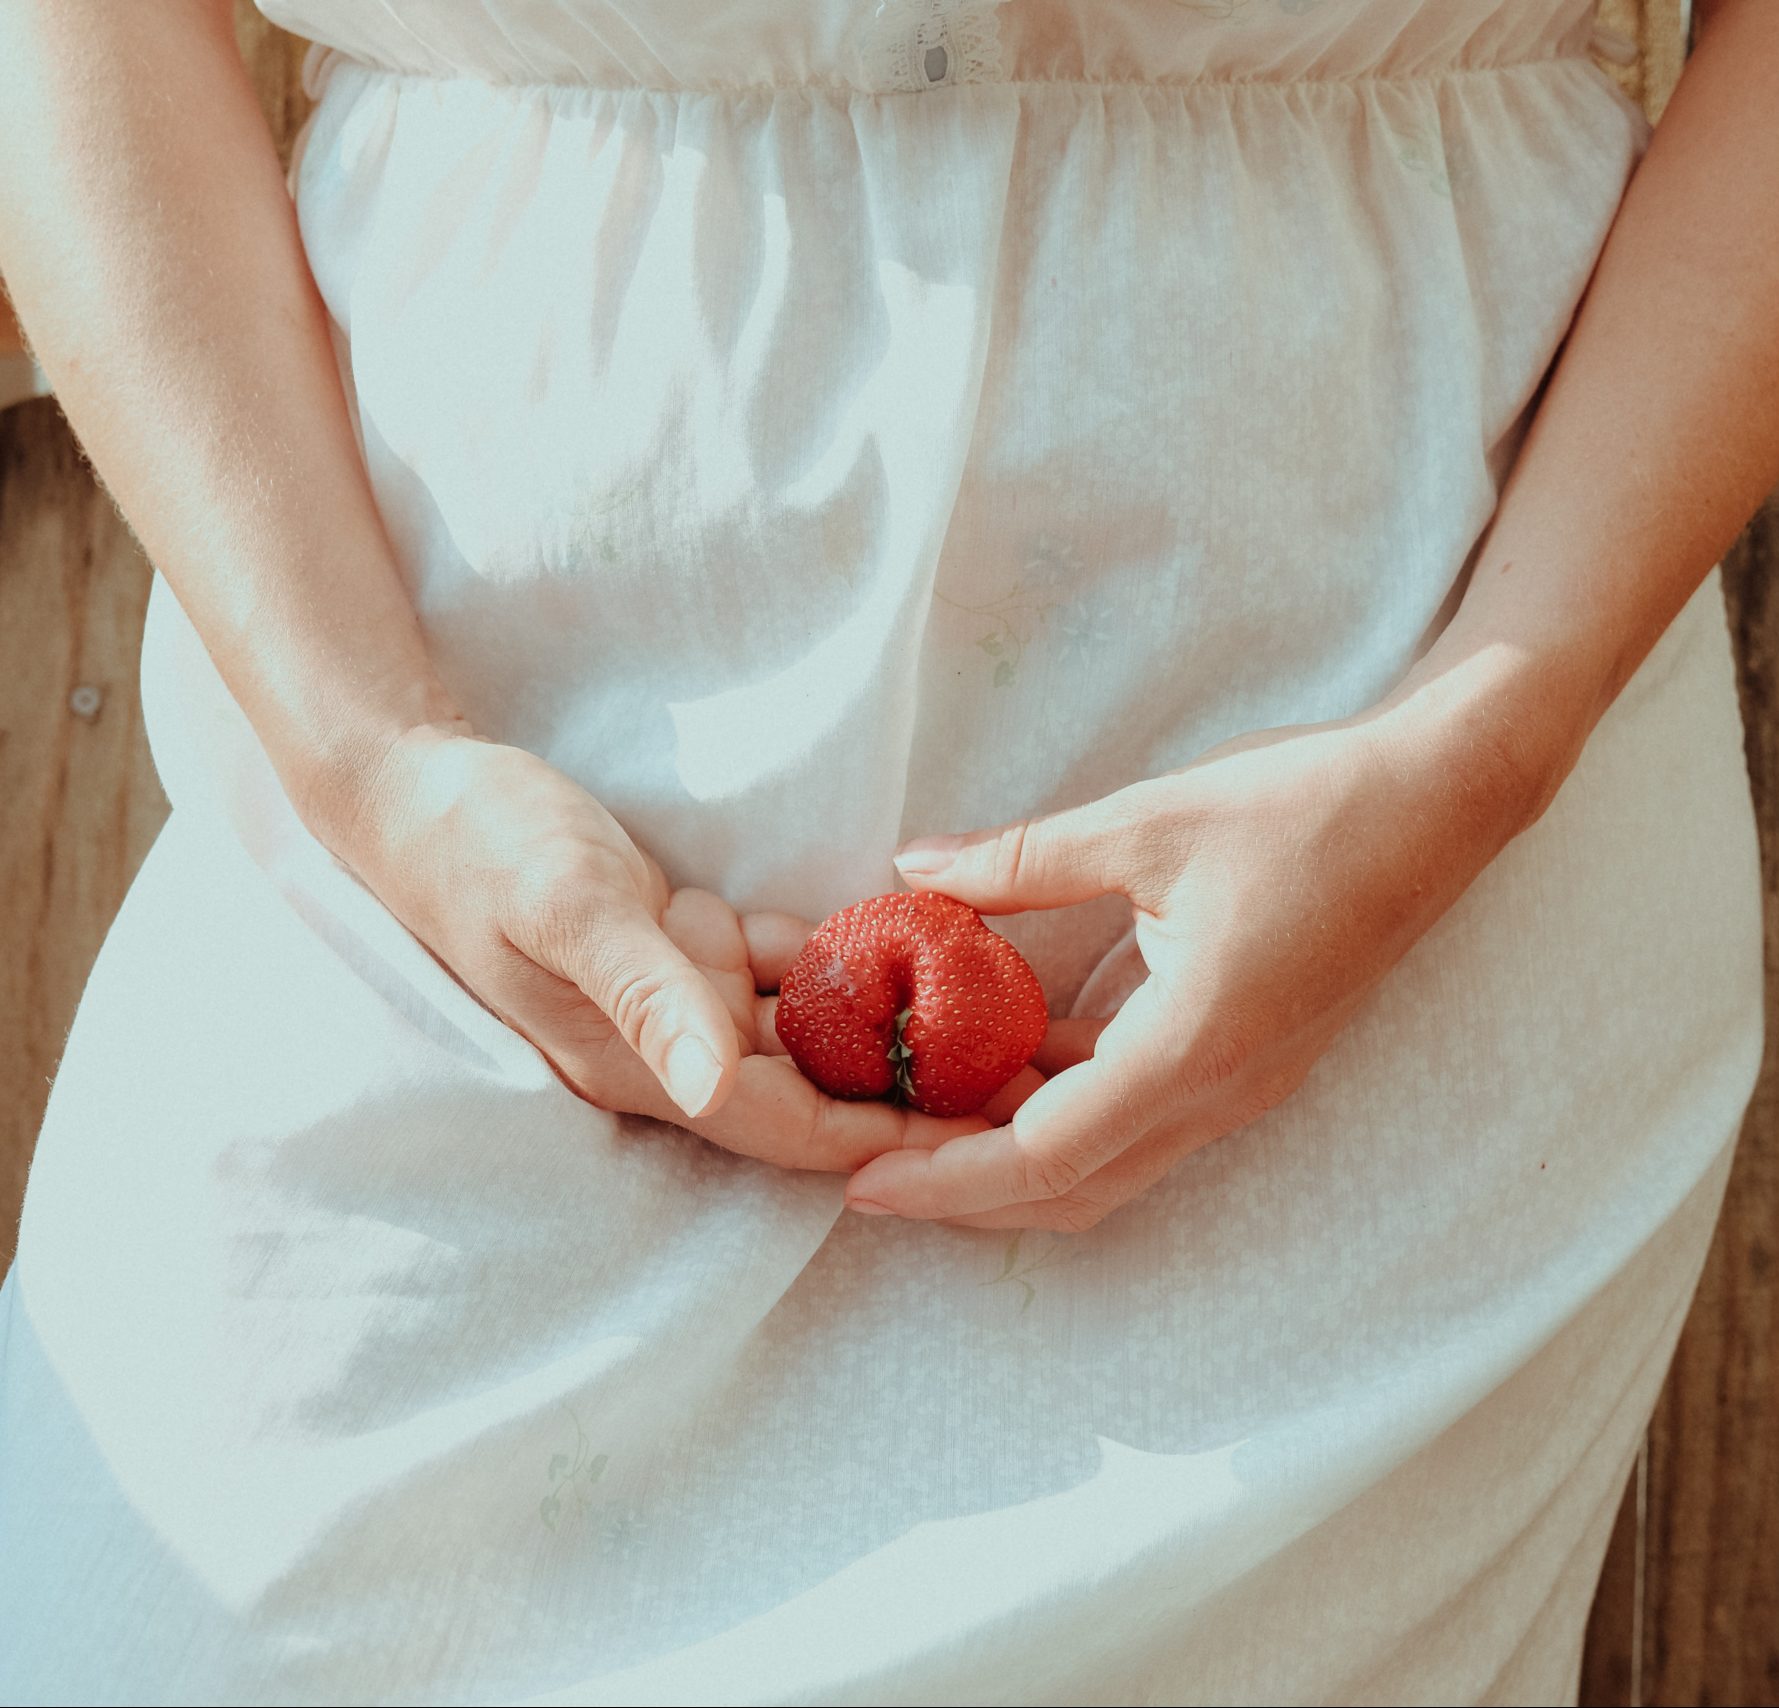 woman in white dress holding clit shaped fruit